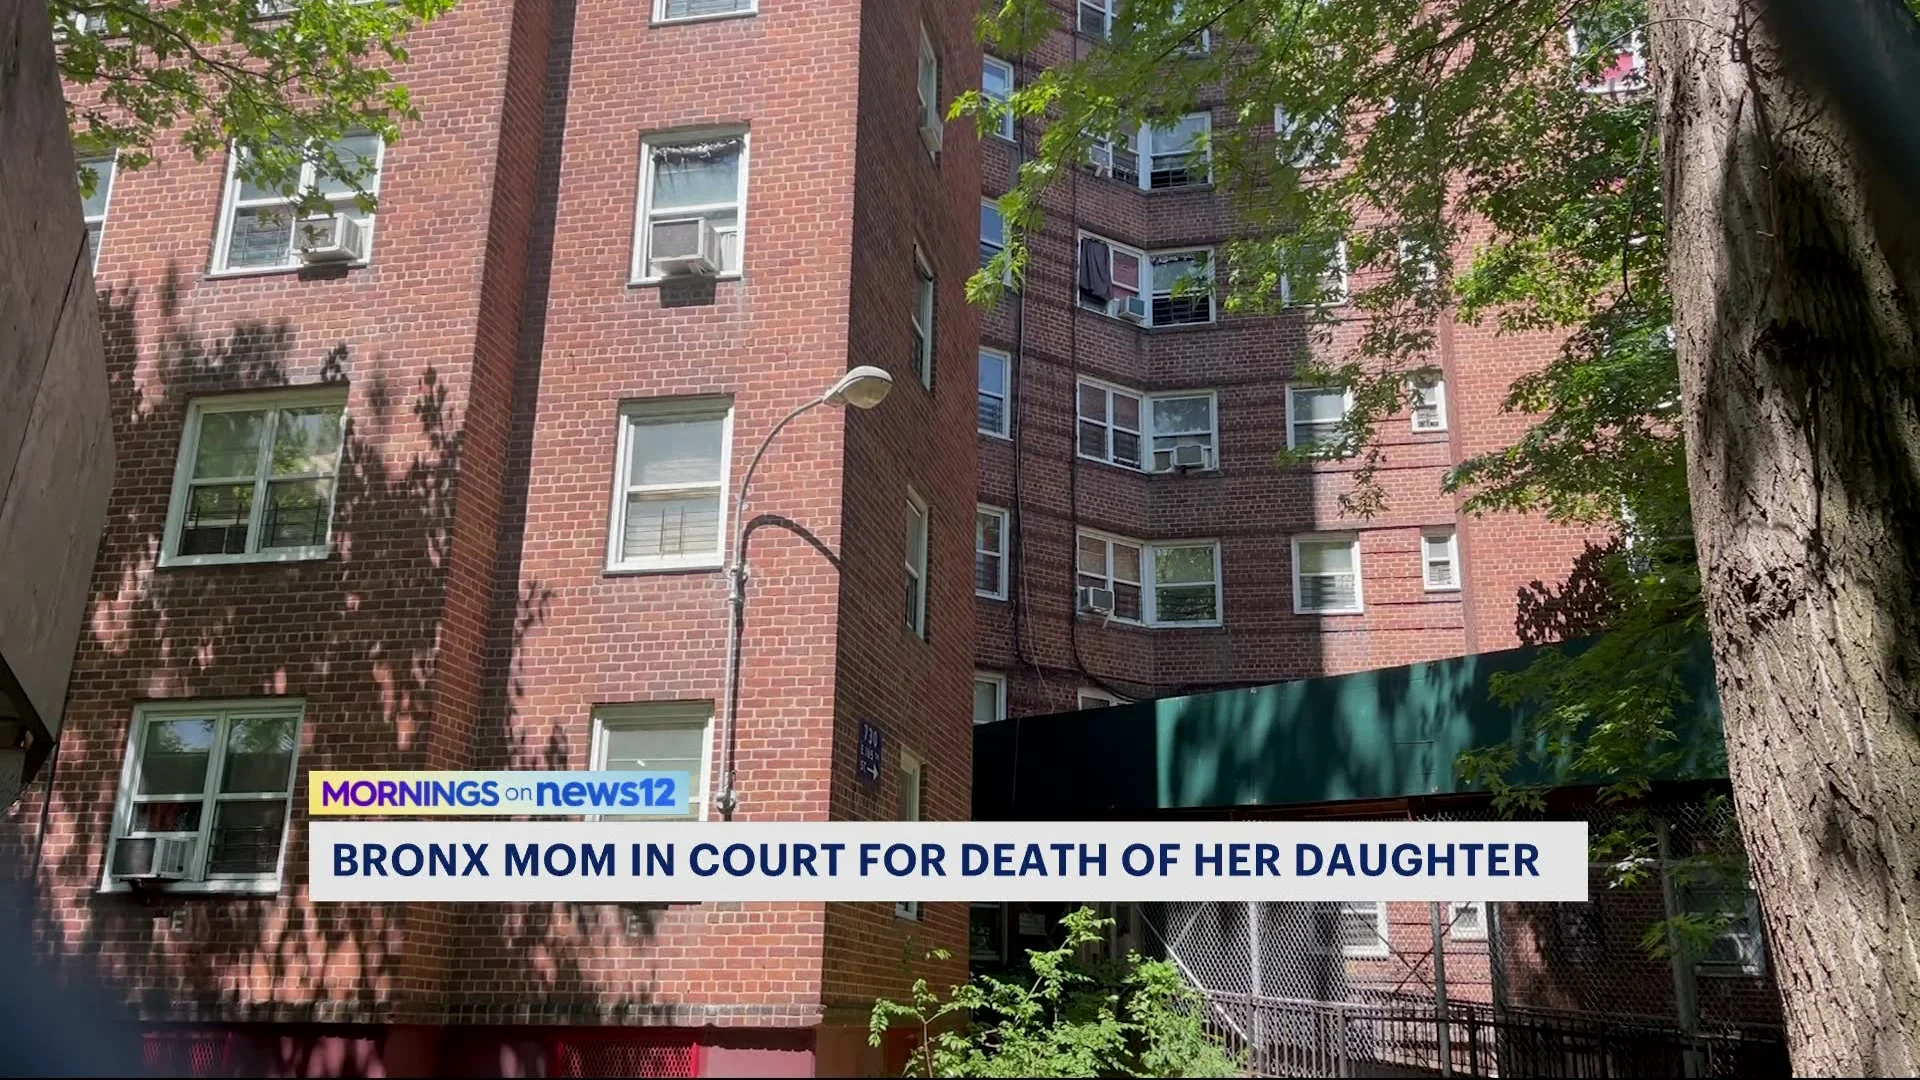 Bronx mother accused of killing 6-year-old daughter due in court today